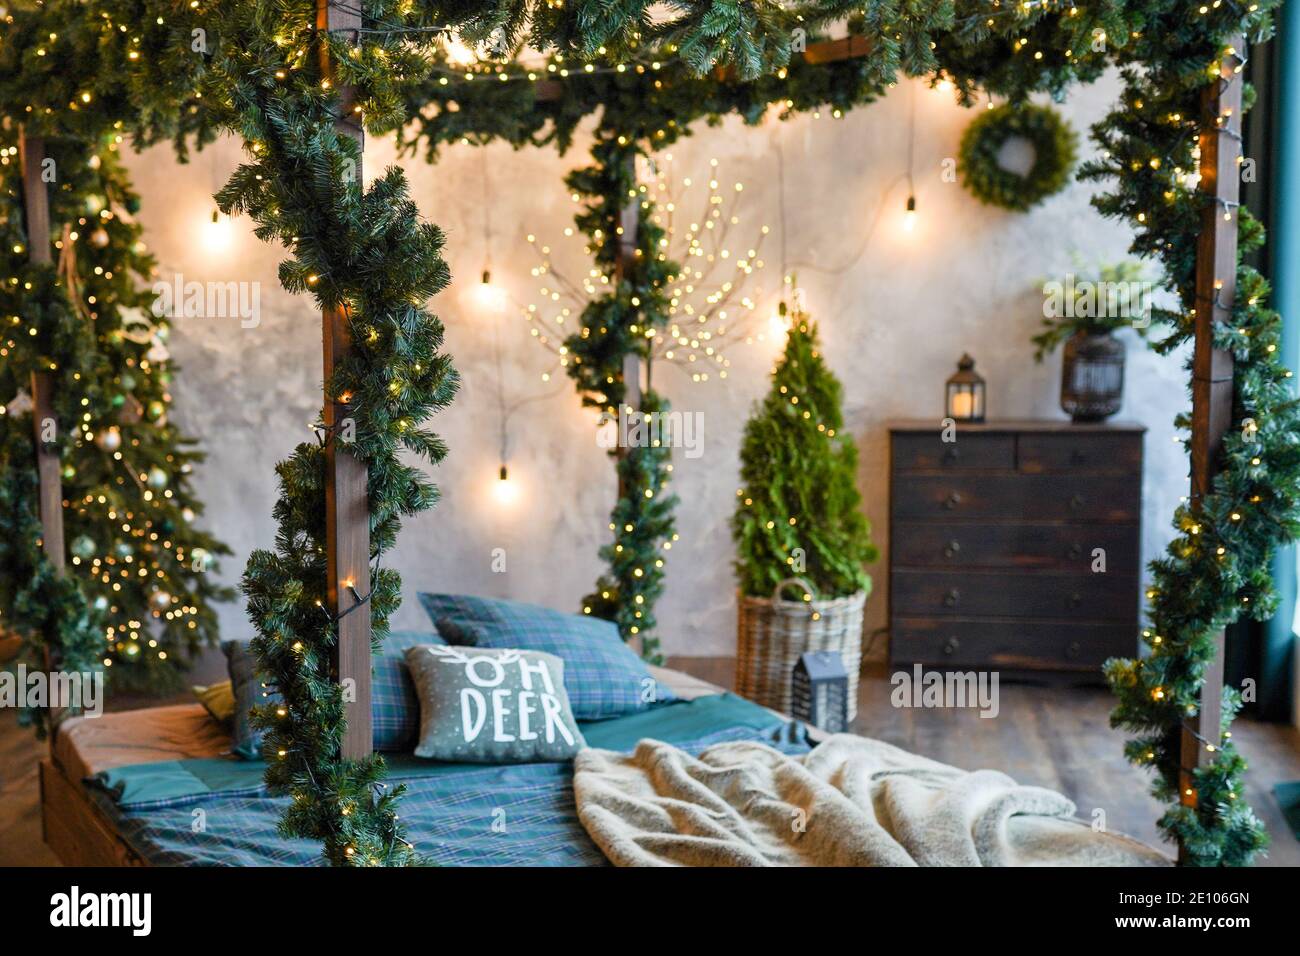 https://c8.alamy.com/comp/2E106GN/comfort-interior-and-holidays-concept-cozy-bedroom-with-bed-and-christmas-garland-lights-at-home-2E106GN.jpg